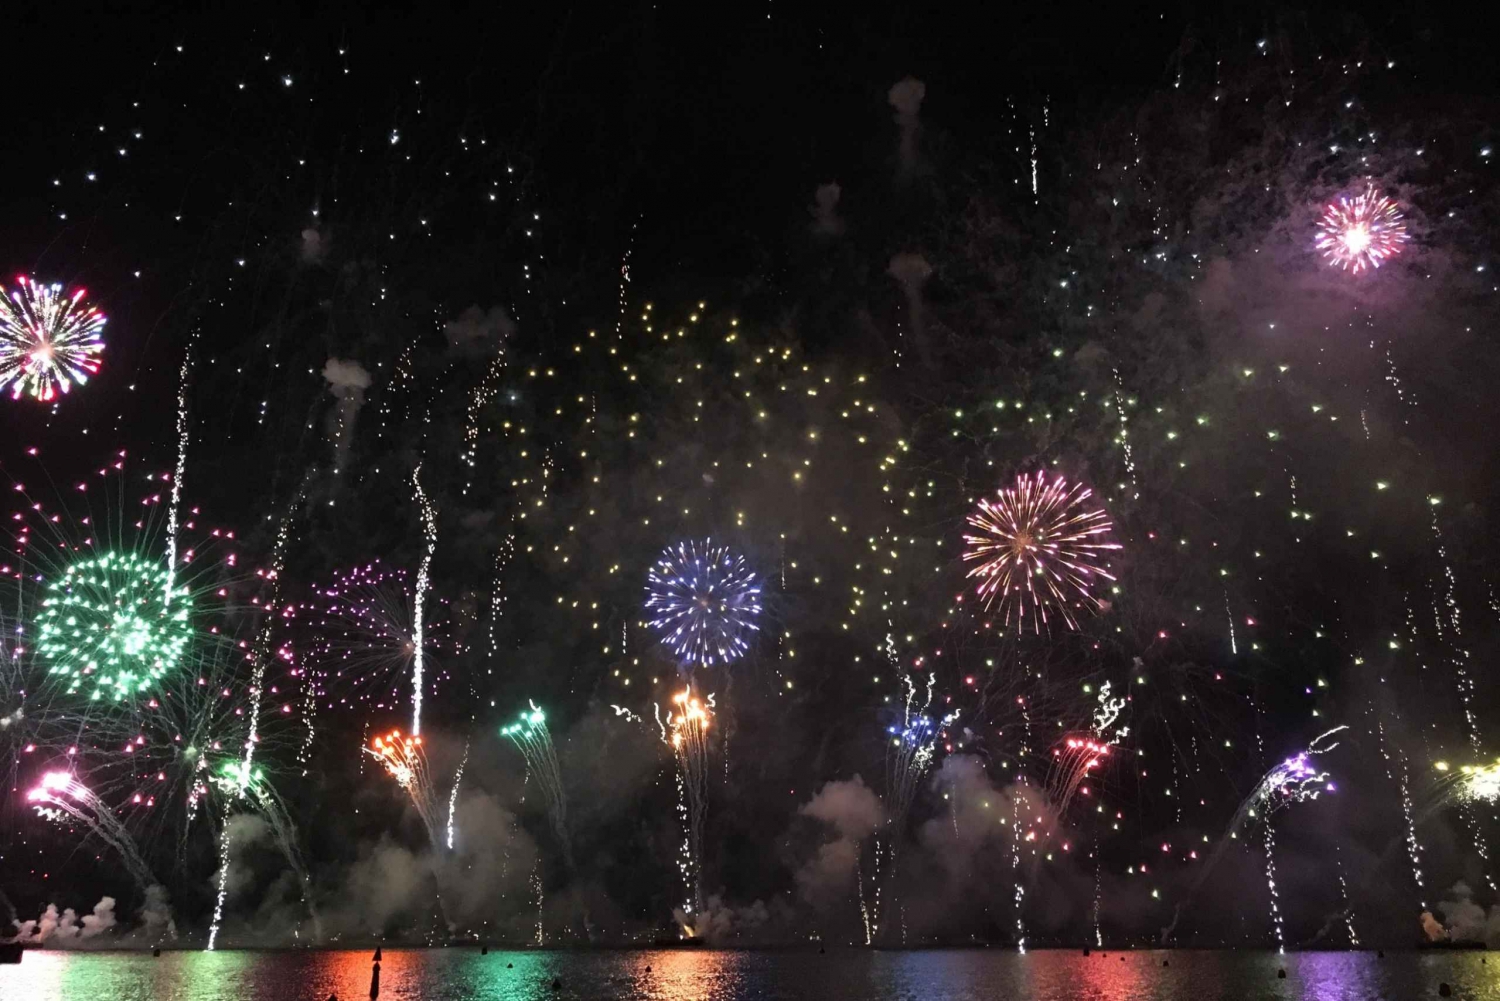 Cannes: Festival of Pyrotechnic Art Fireworks from the water